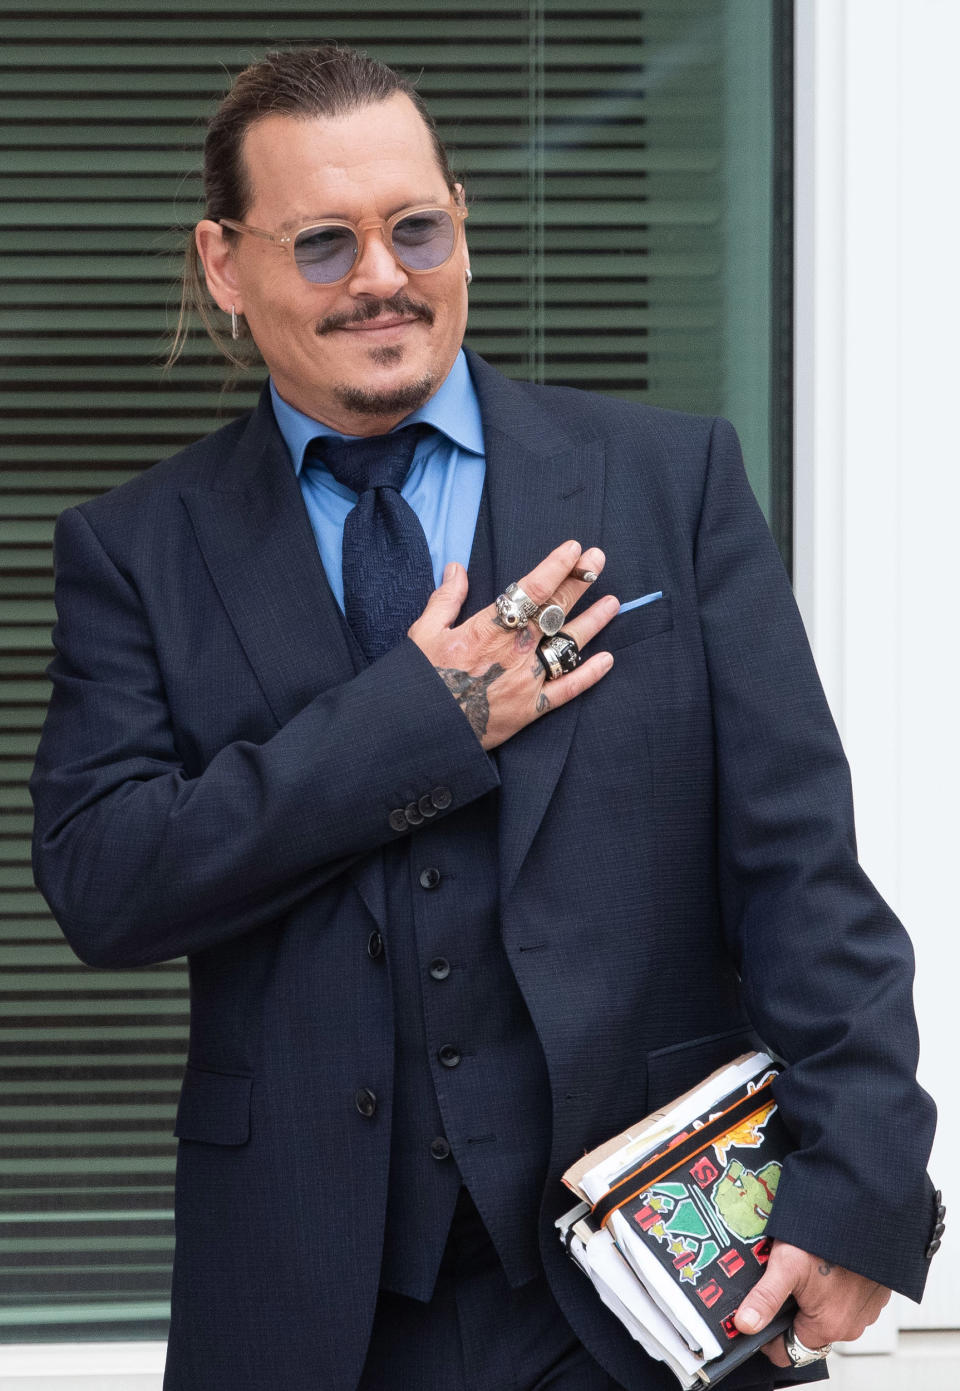 Johnny Depp has joined TikTok following his defamation trial against ex-wife Amber Heard. (Cliff Owen / Consolidated News Pictures / Getty Images)